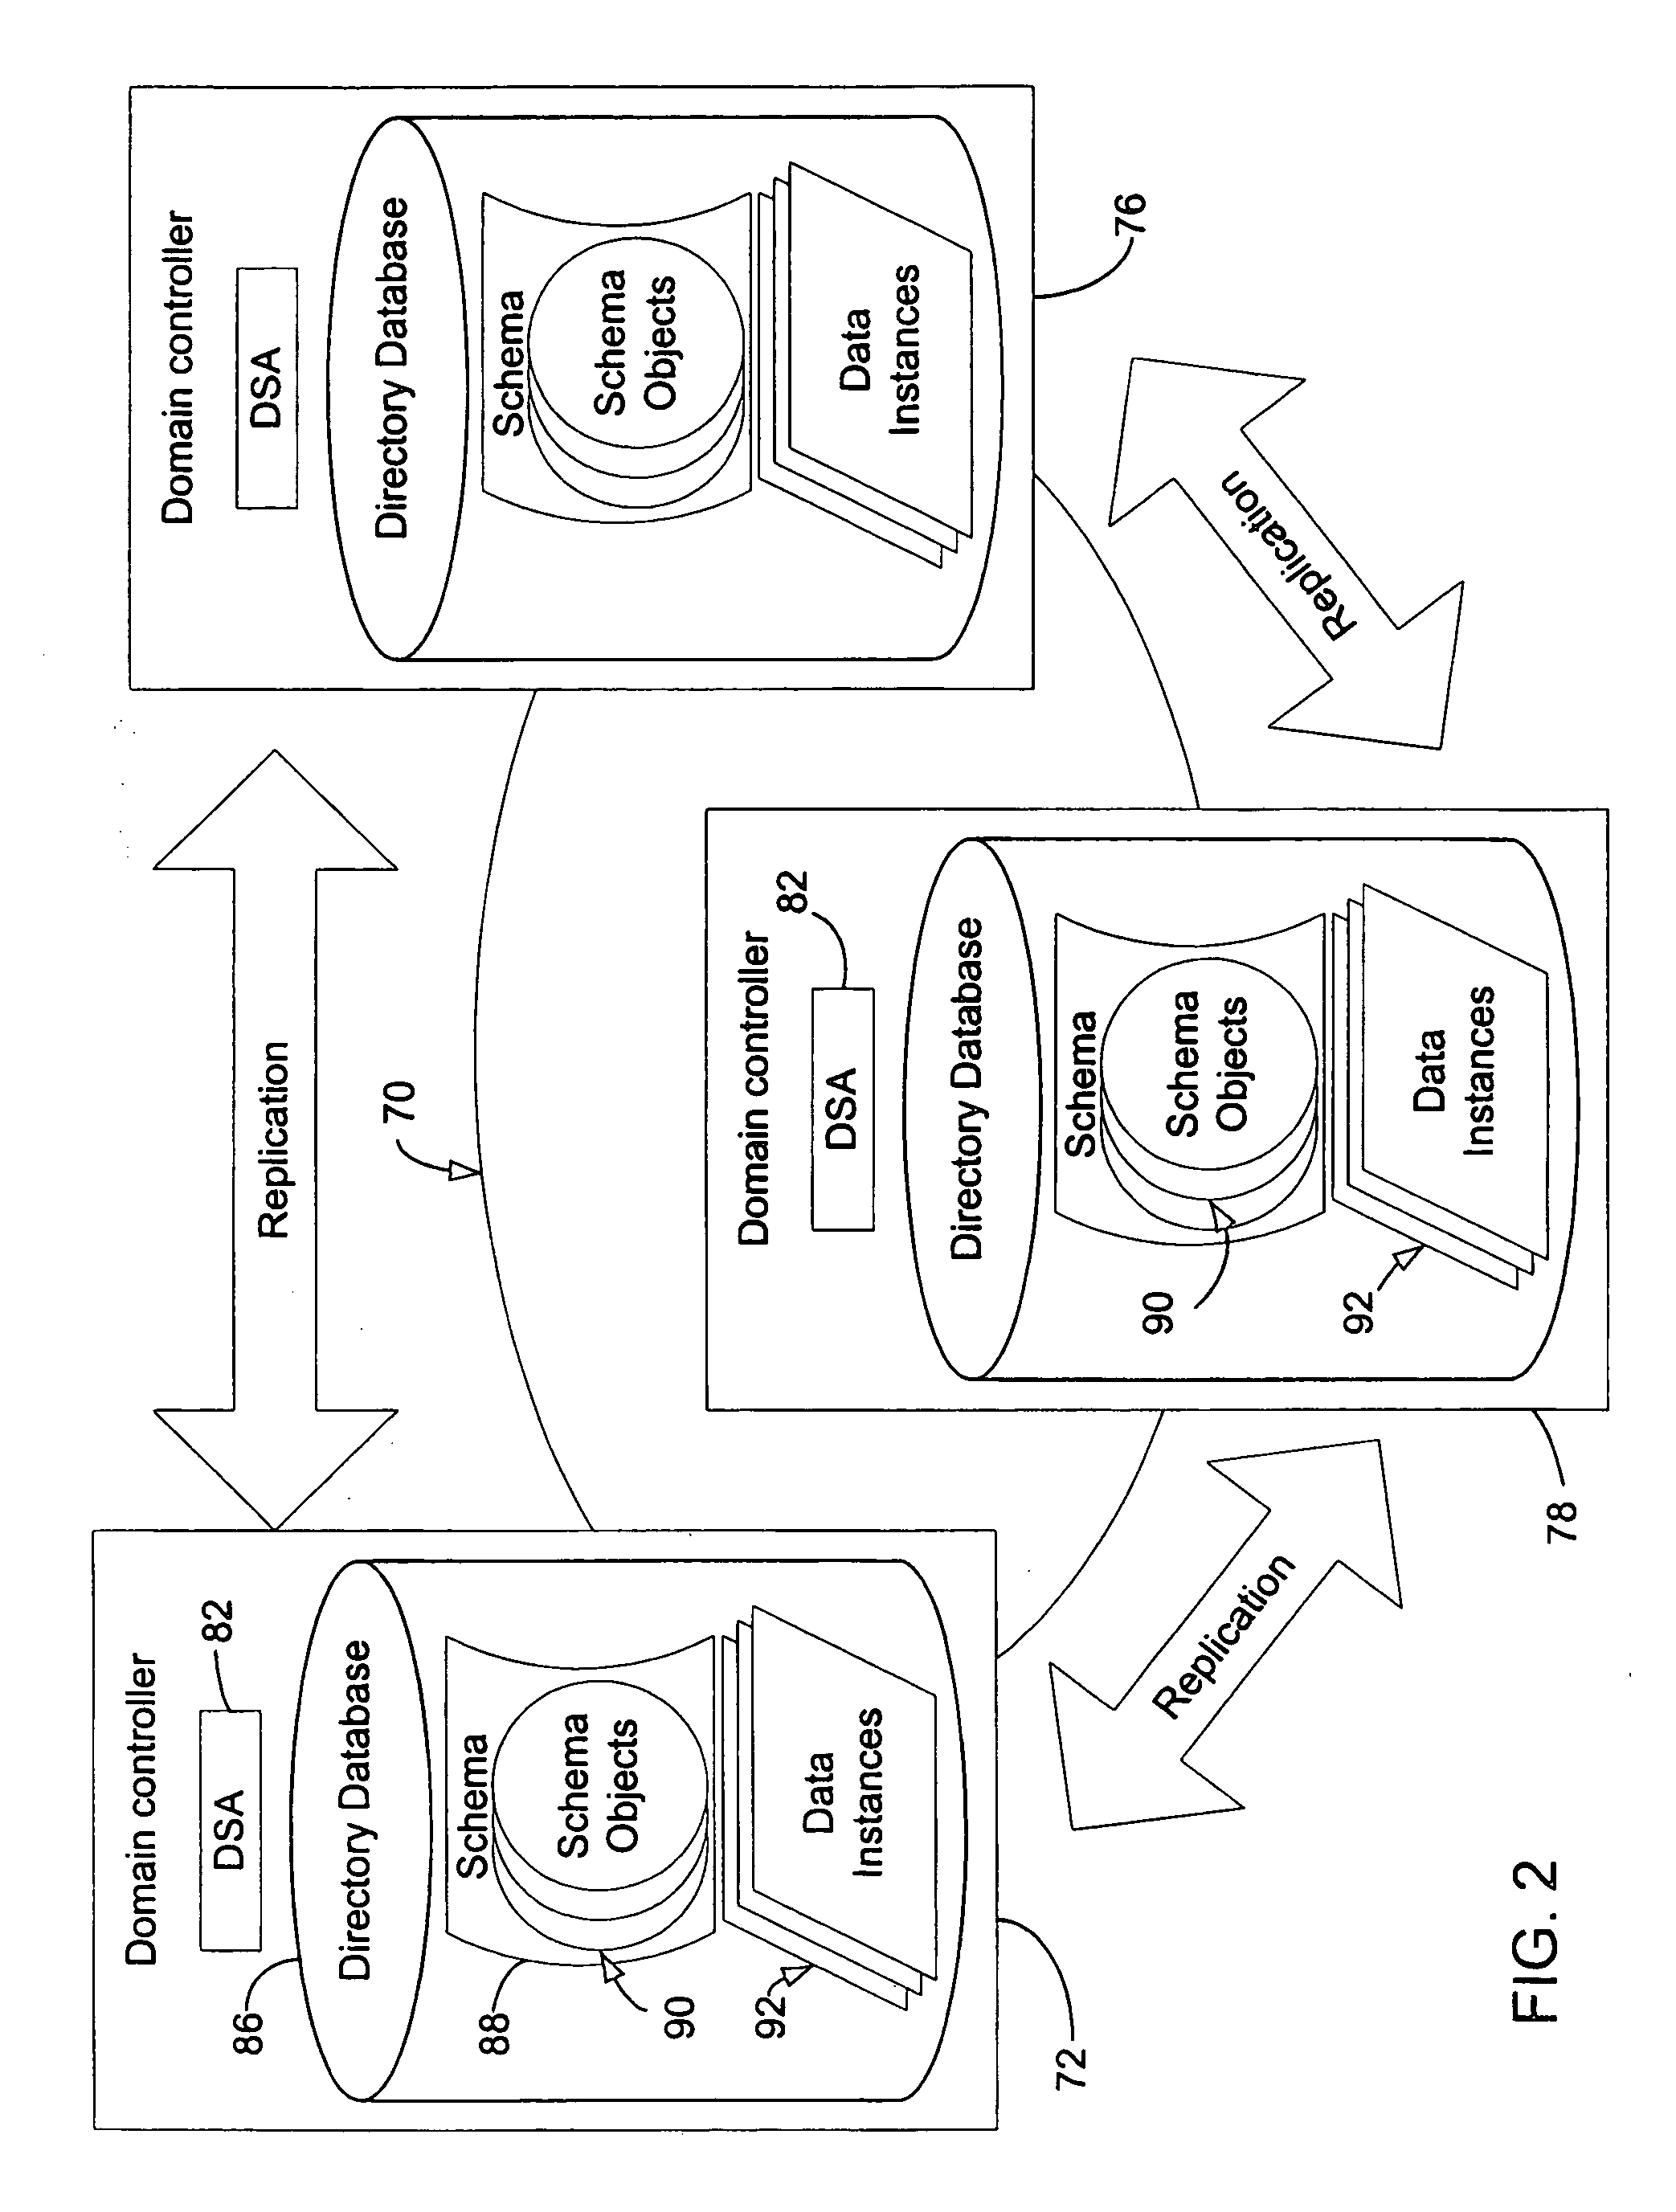 Method and system for modifying schema definitions